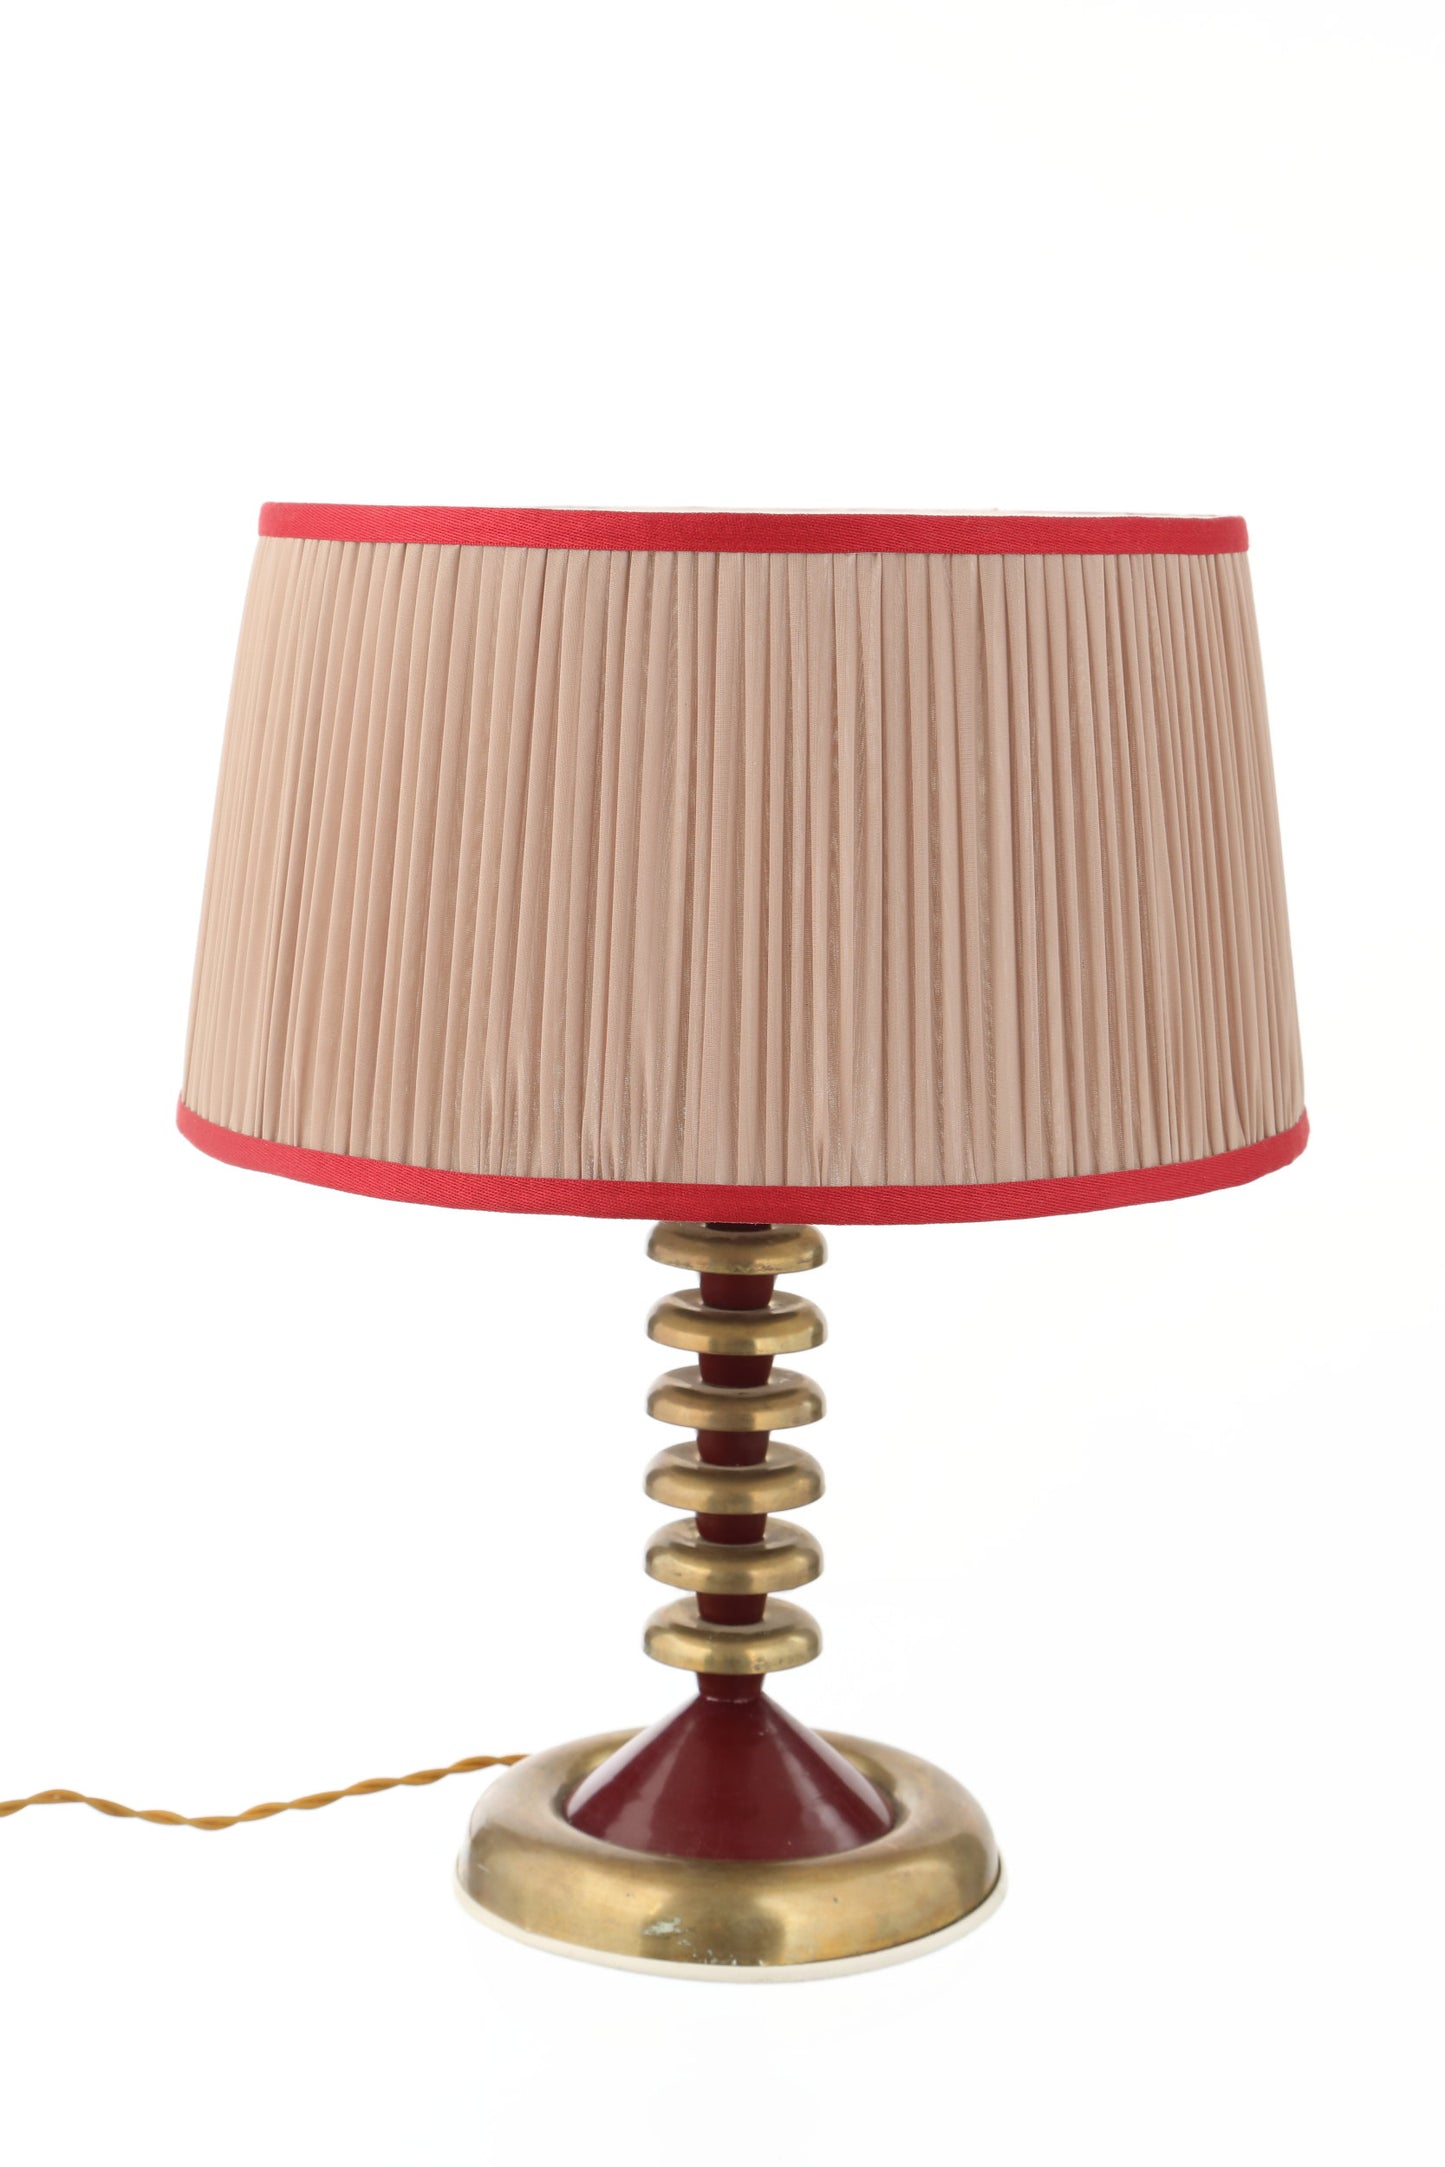 70s lamp with brass circles and burgundy lacquer